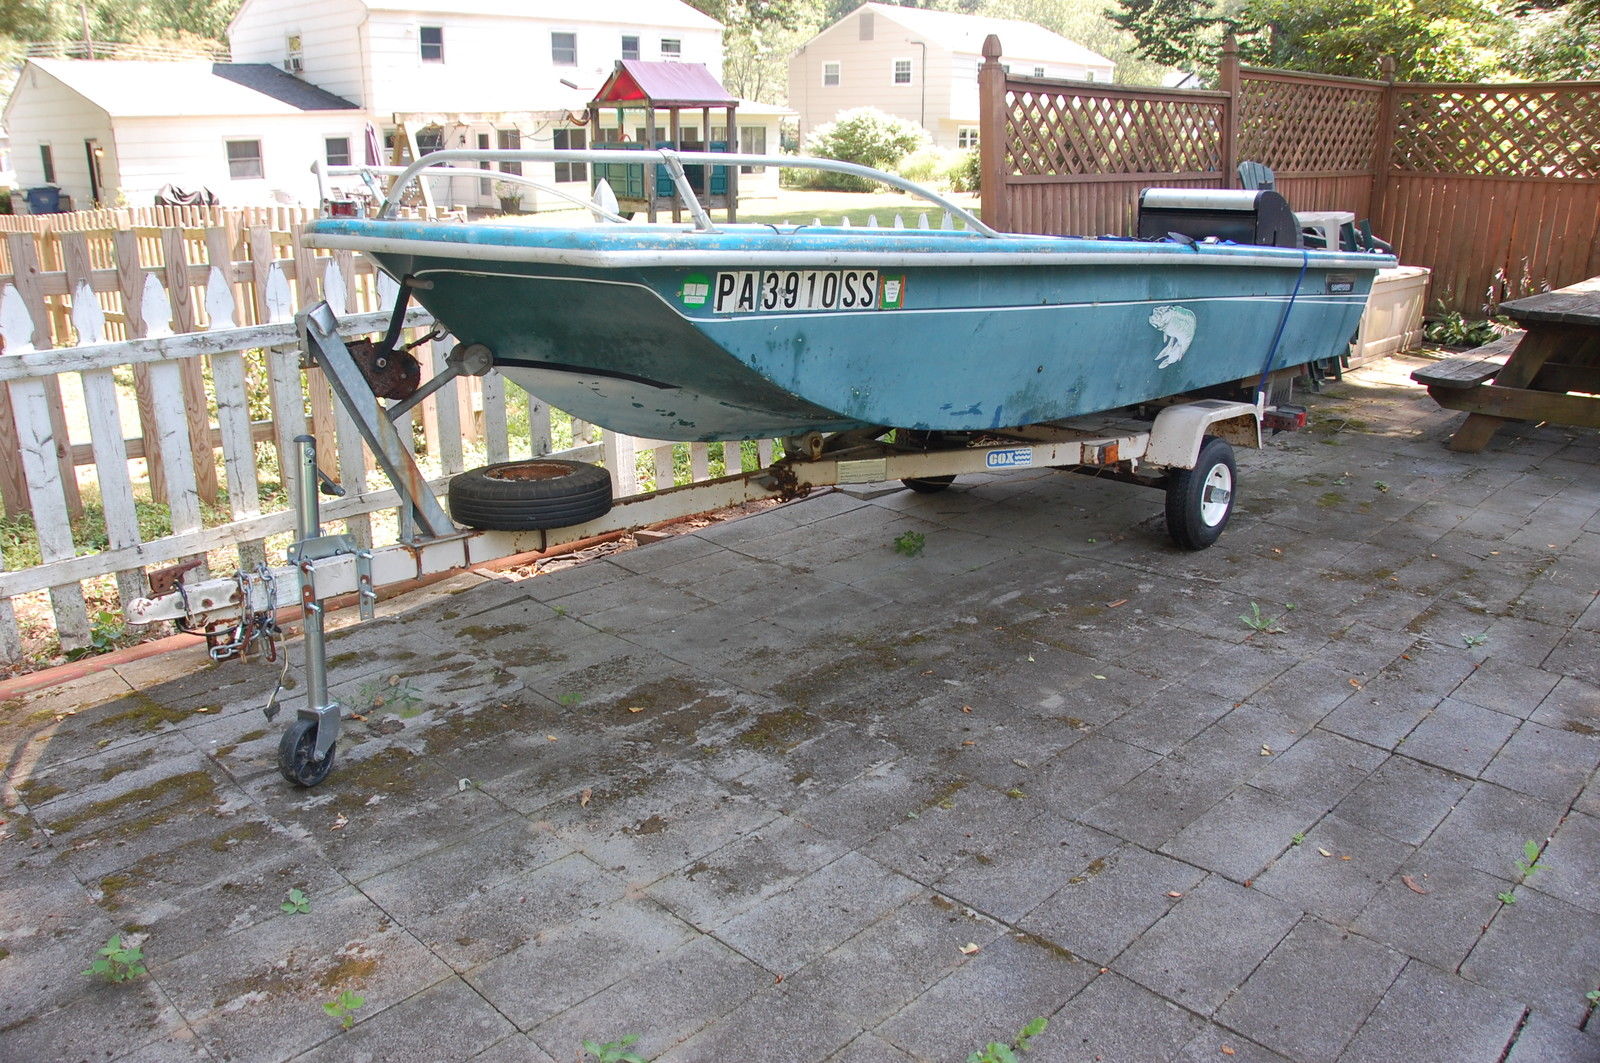 Sears Gamefisher 1977 for sale for $425 - Boats-from-USA.com